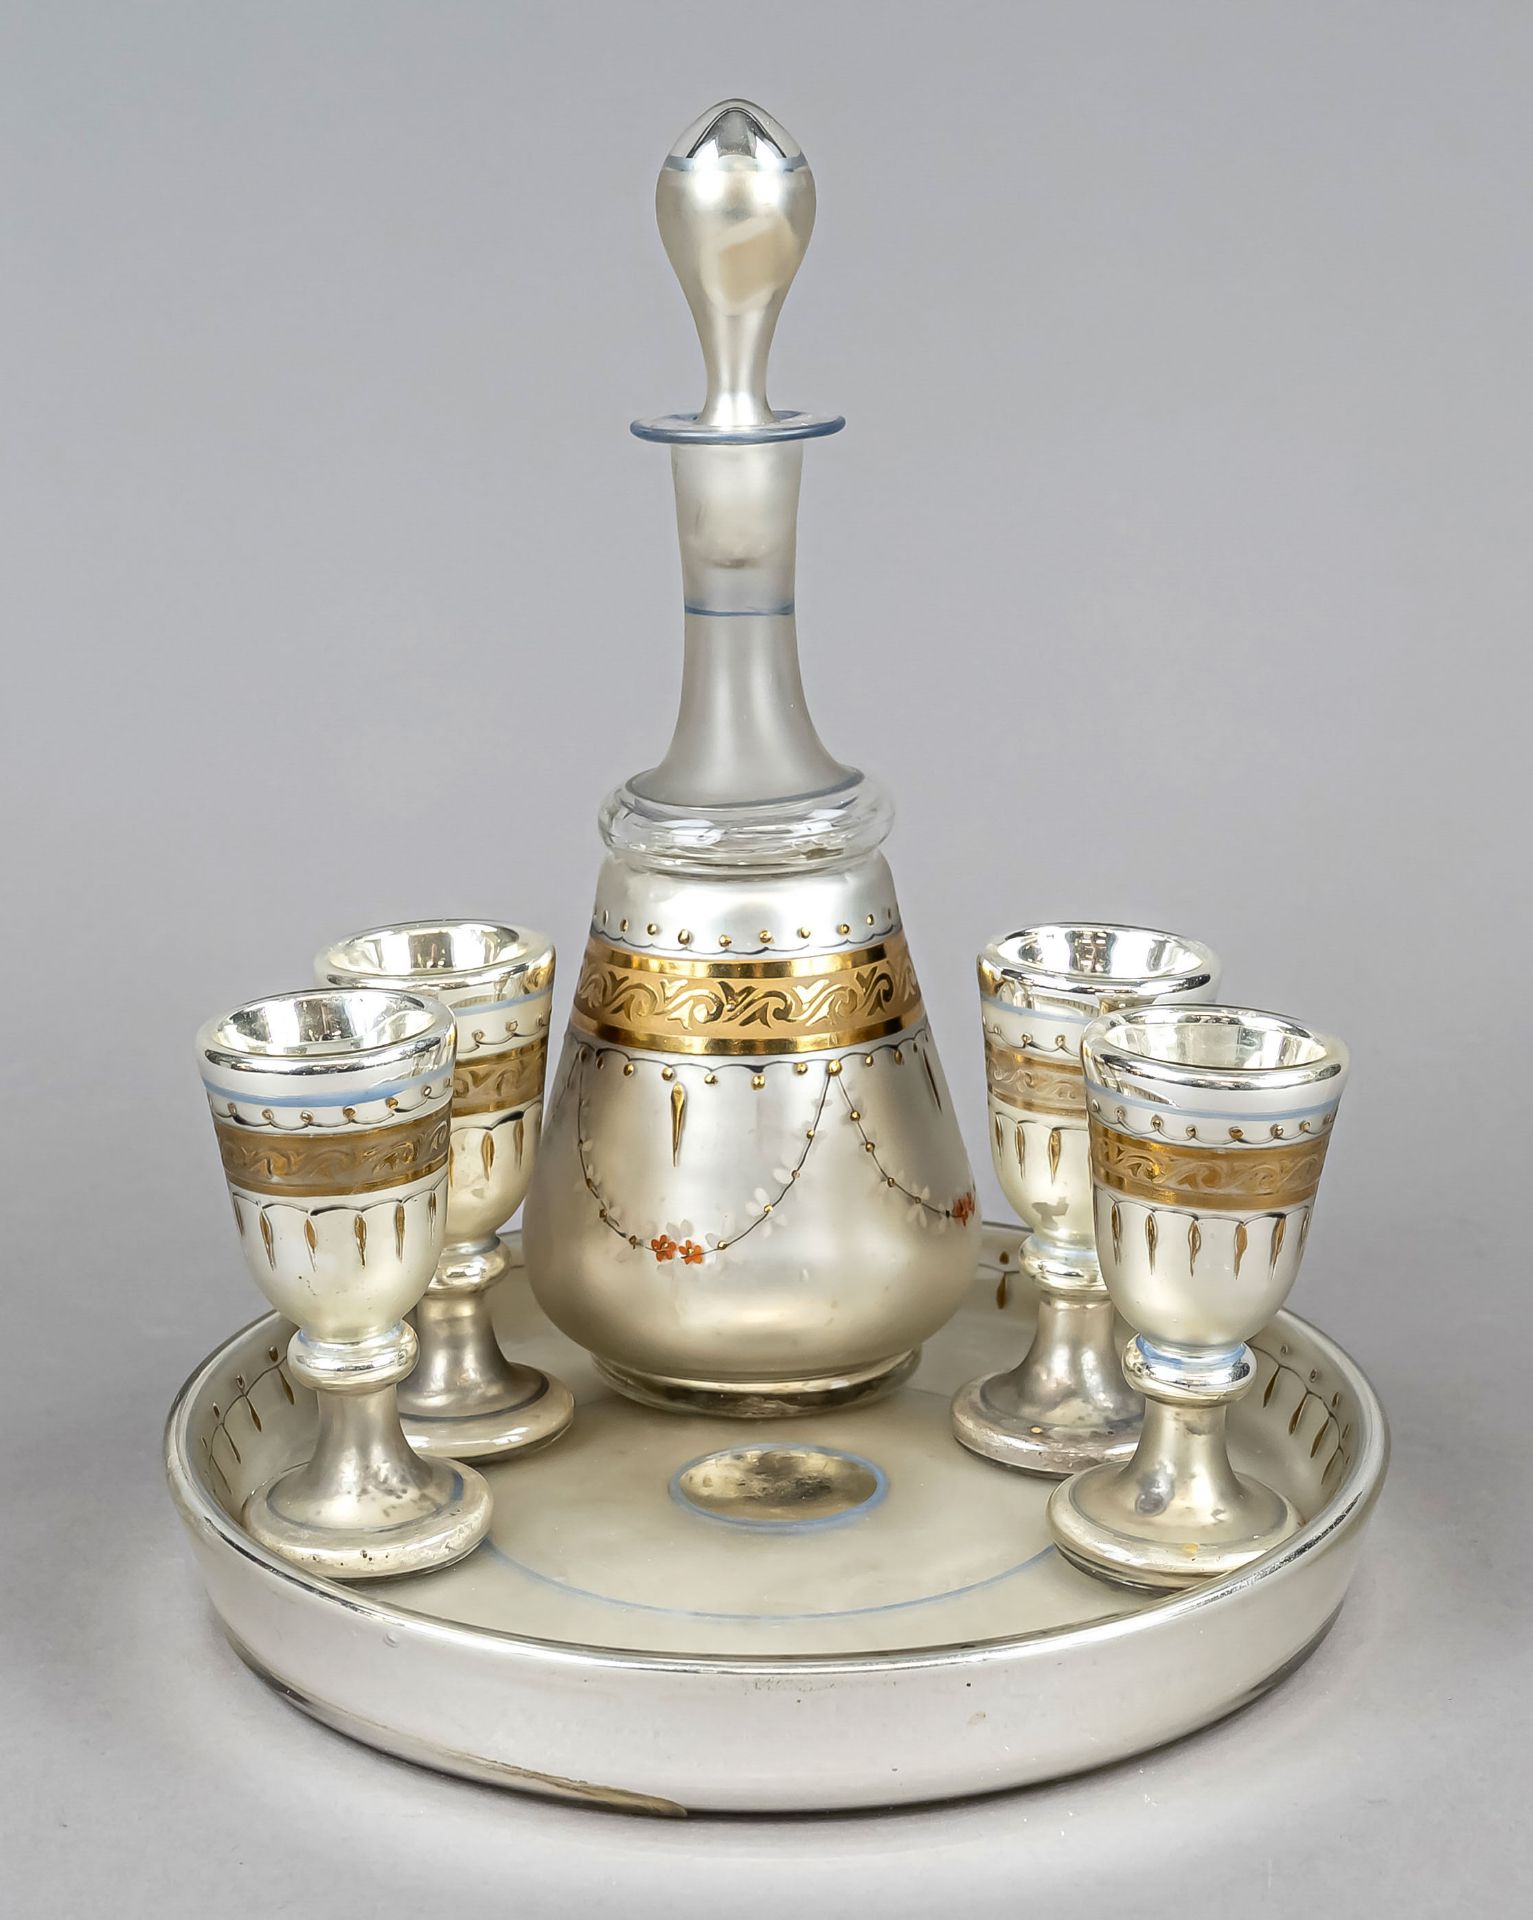 Six-piece farm silver liqueur set, round tray with carafe and 4 glasses, each with gold